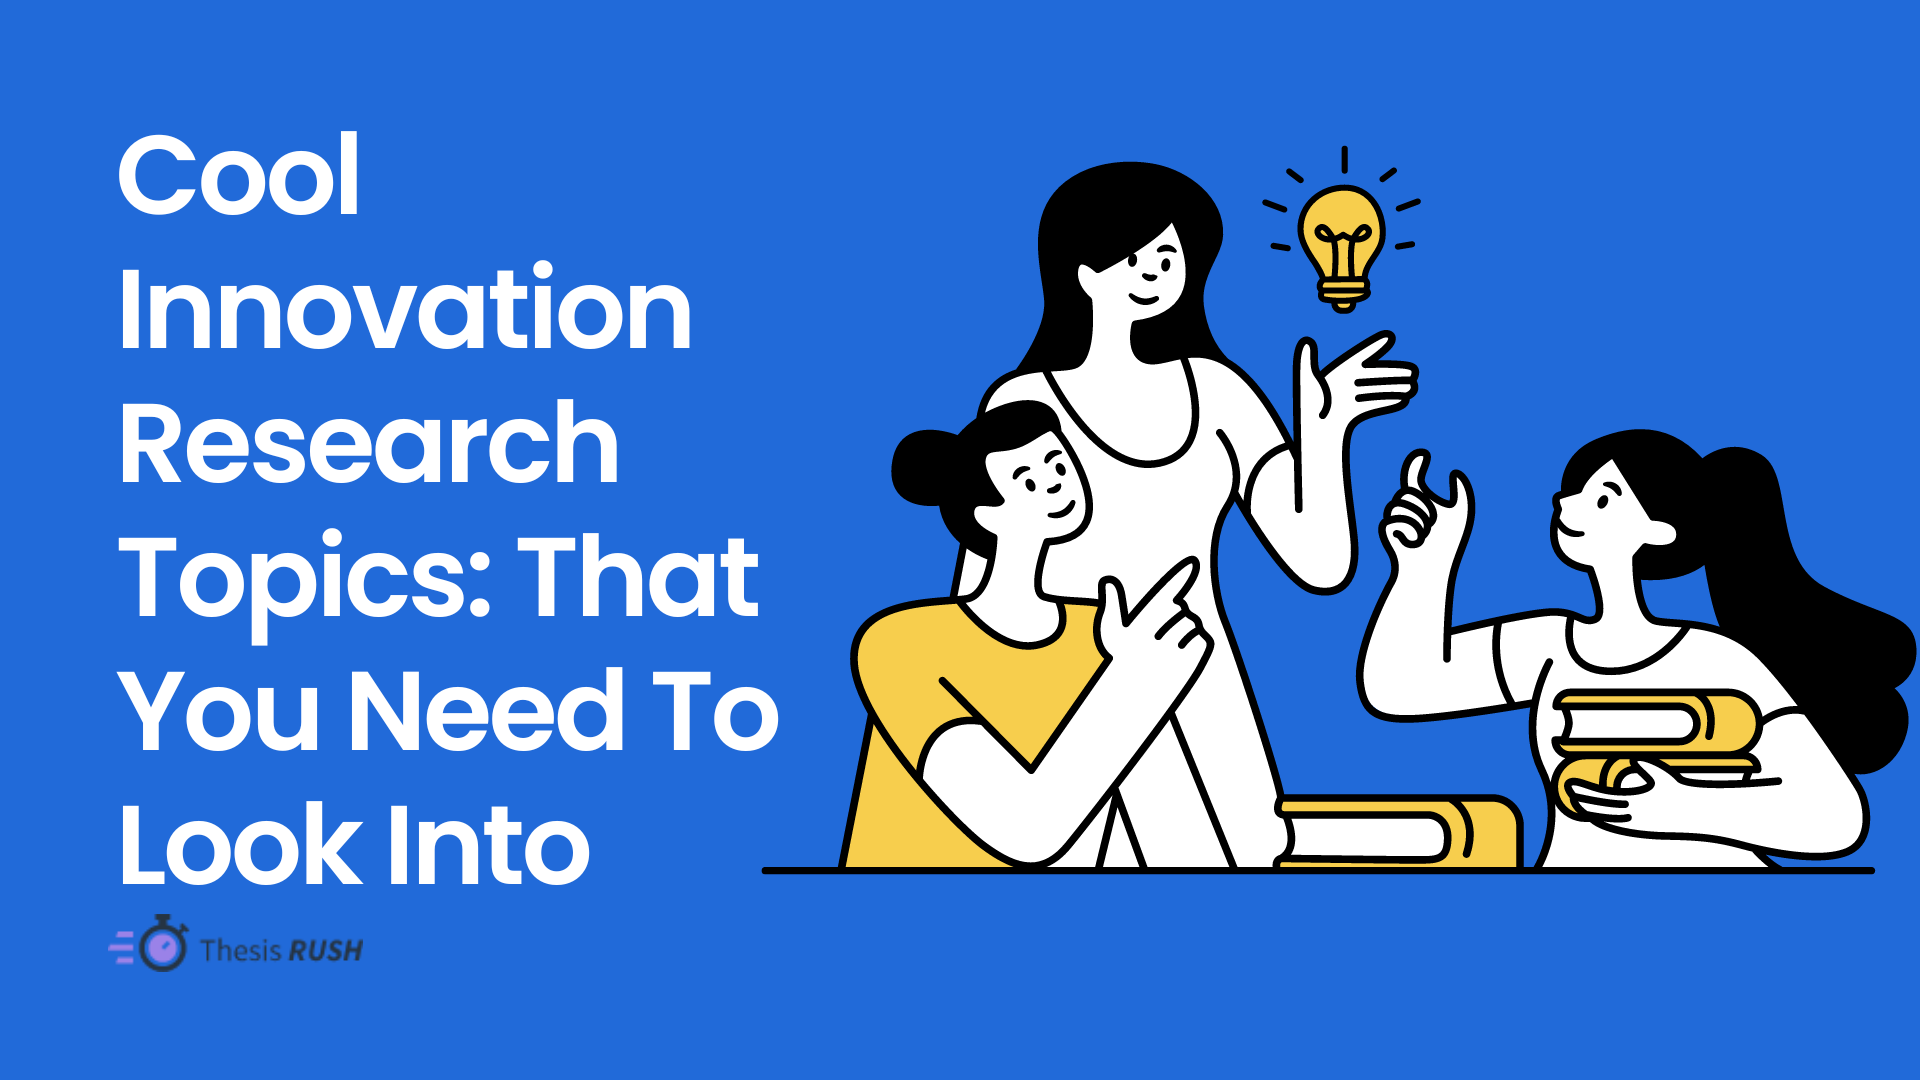 Innovation Research Topics: That You Need To Look Into